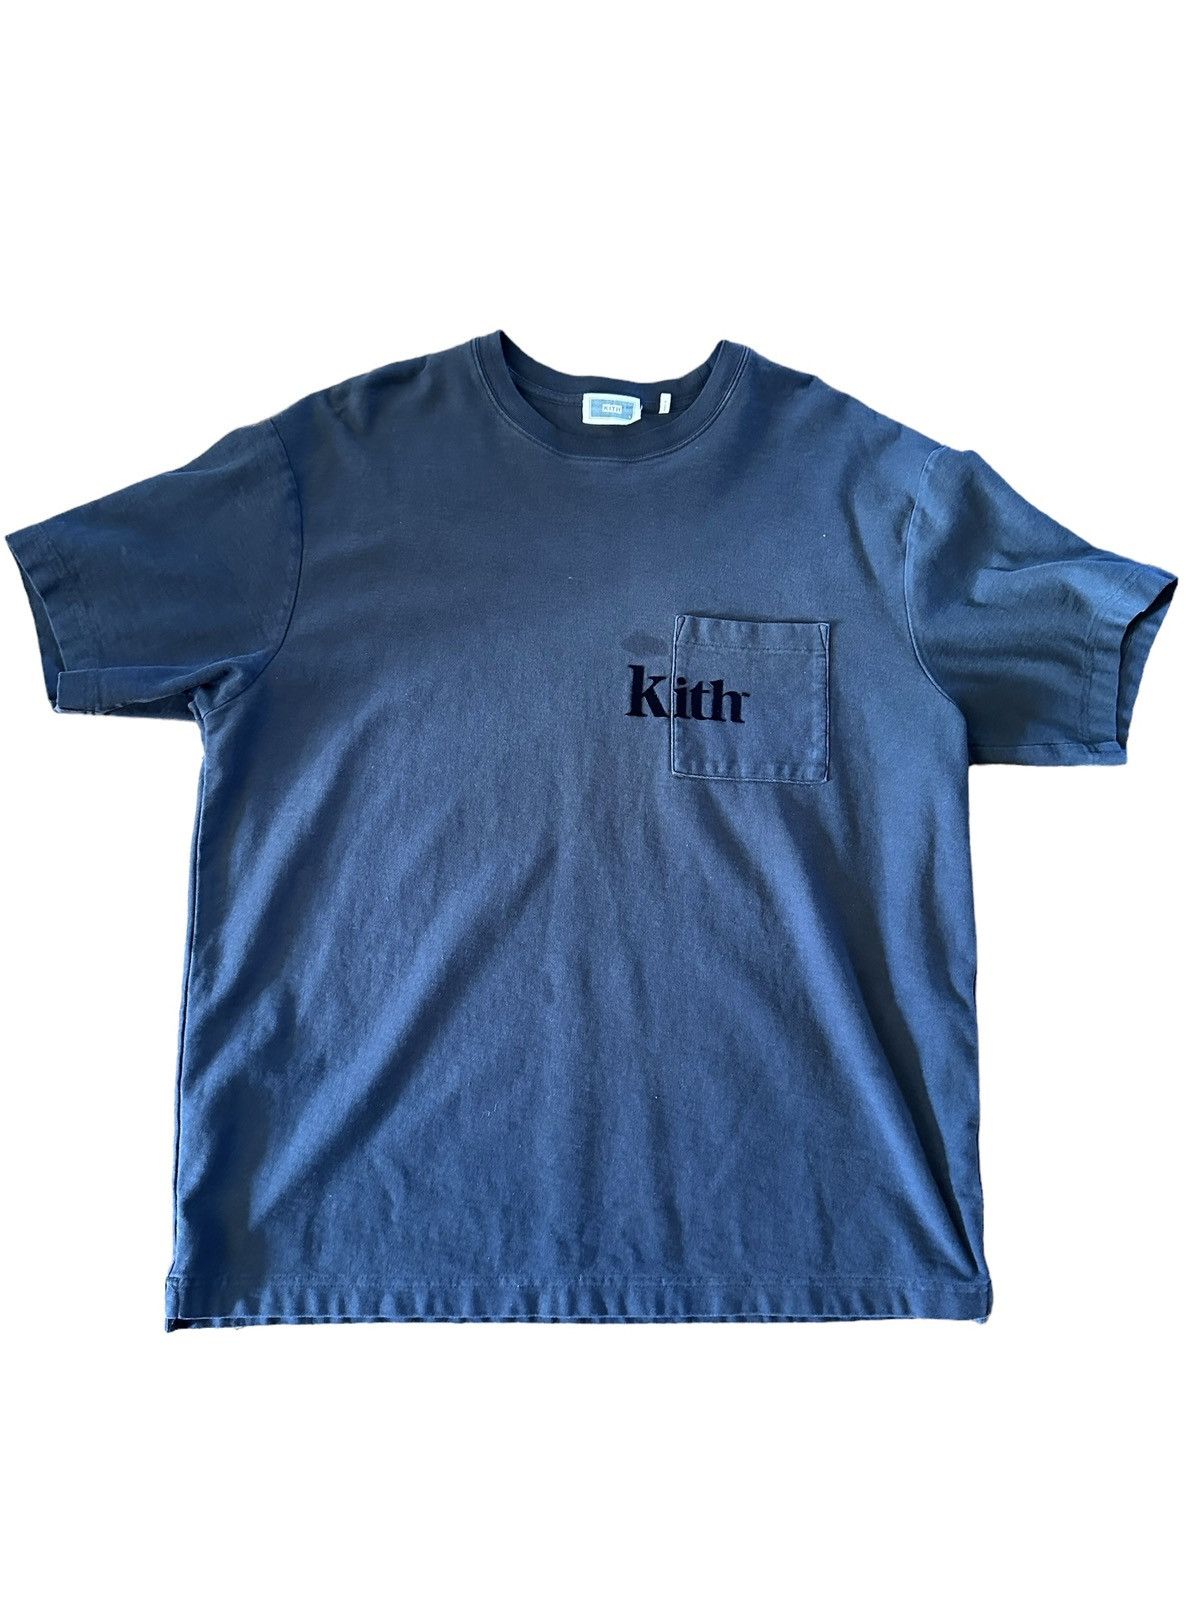 Kith Kith x Tom and Jerry Tee Turtle Dove | Grailed